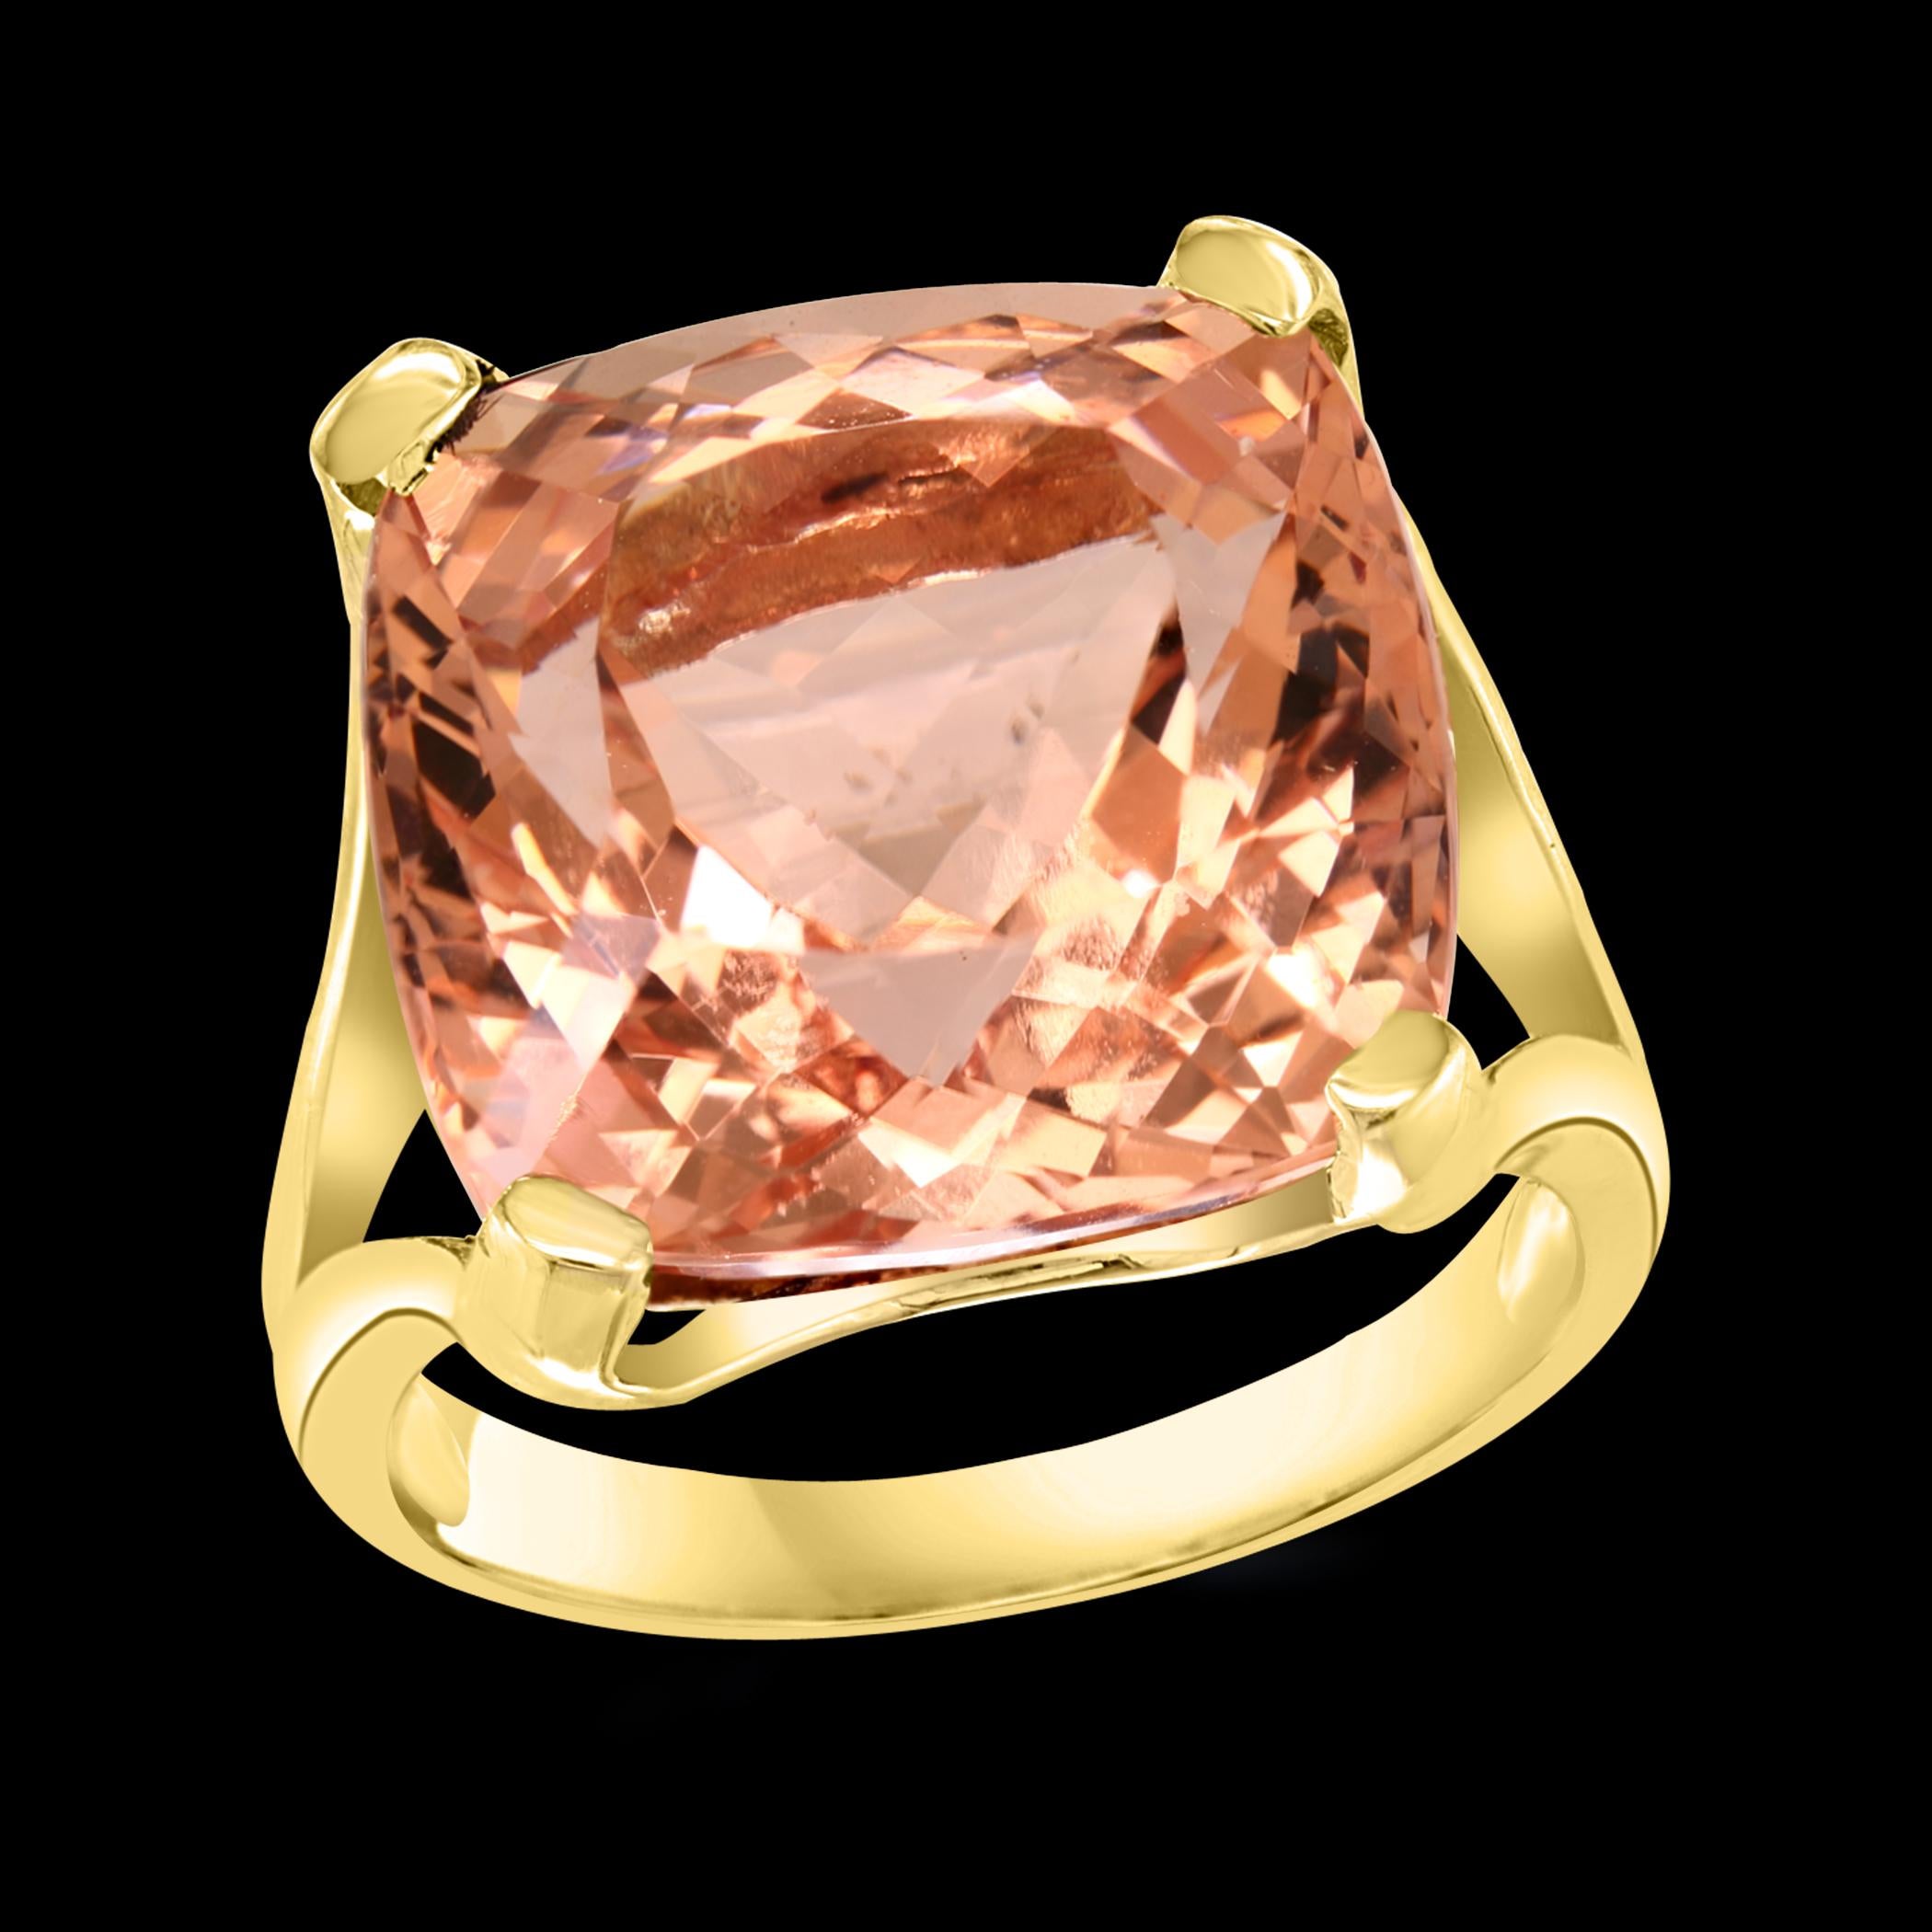 16 Carat  Morganite  Cocktail Ring  14 Karat Yellow Gold Estate
A classic, Cocktail ring 
Huge 16  Carat of very clean no inclusion  Morganite full of luster and shine  ring.
Simple and elegant
14 Karat Gold 6.7 gram including the stone
Ring Size